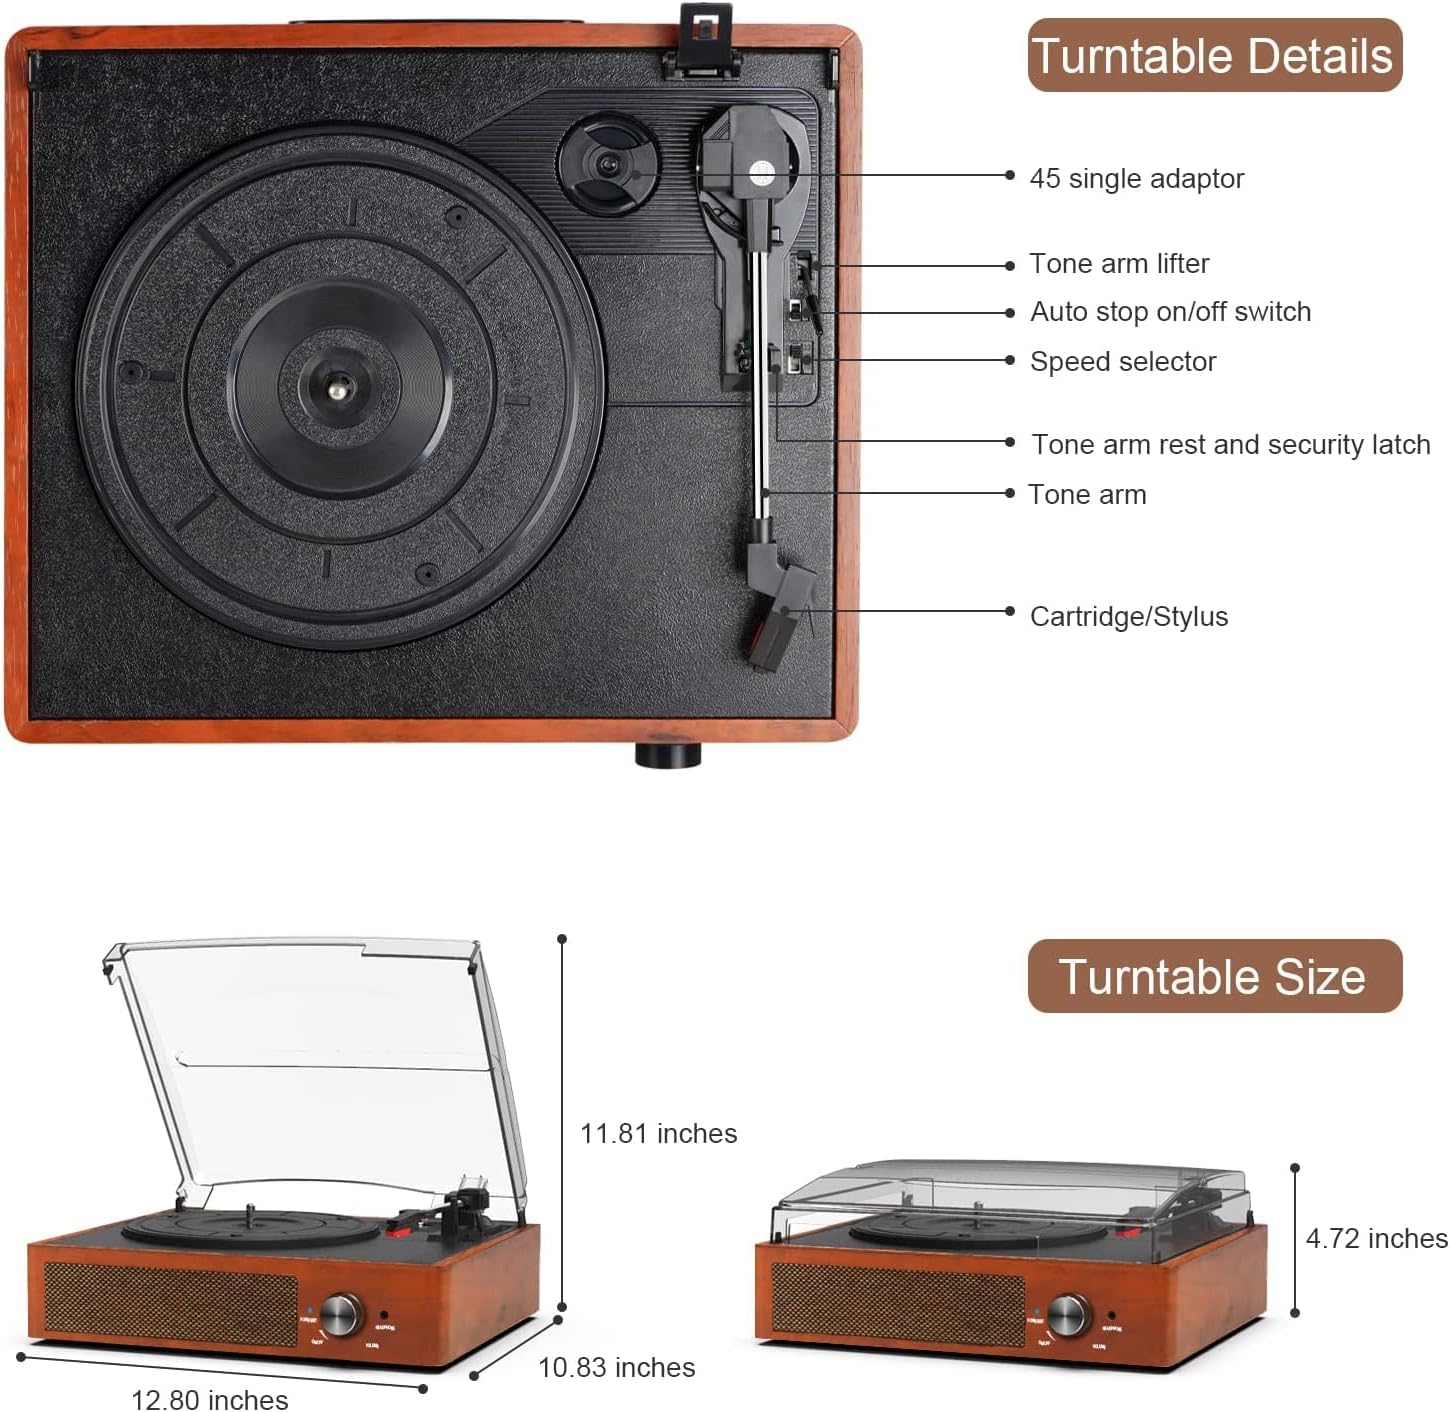 Bluetooth Turntable Vinyl Record Player with Speakers, 3 Speed Belt Driven Vintage Player for Entertainment AUX in RCA Out